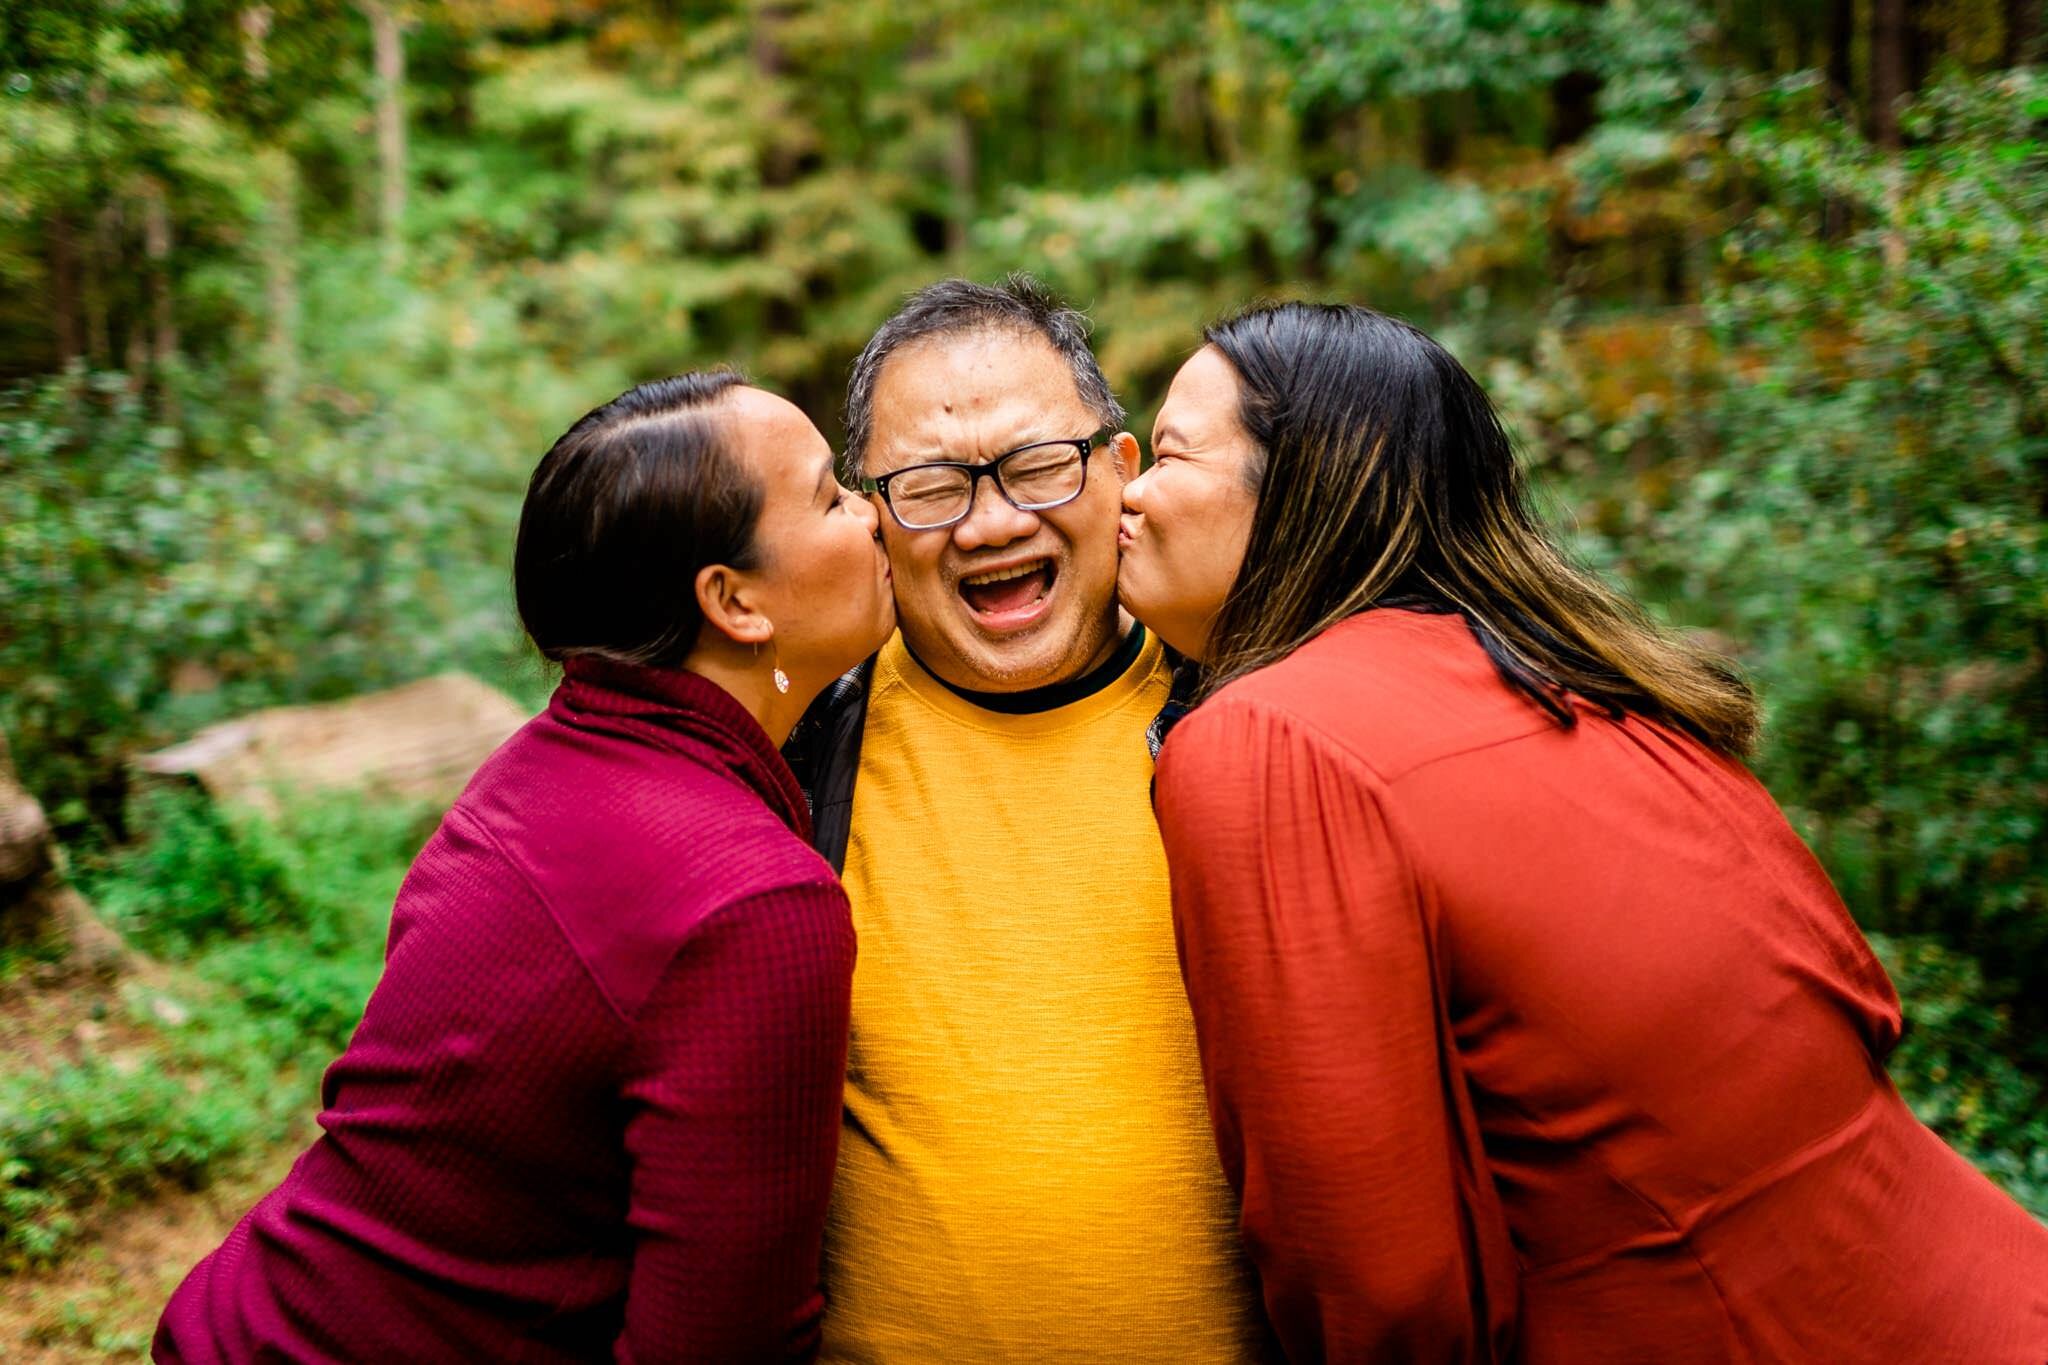 Raleigh Family Photographer | By G. Lin Photography | Umstead Park | Two daughters giving dad a kiss on the cheek